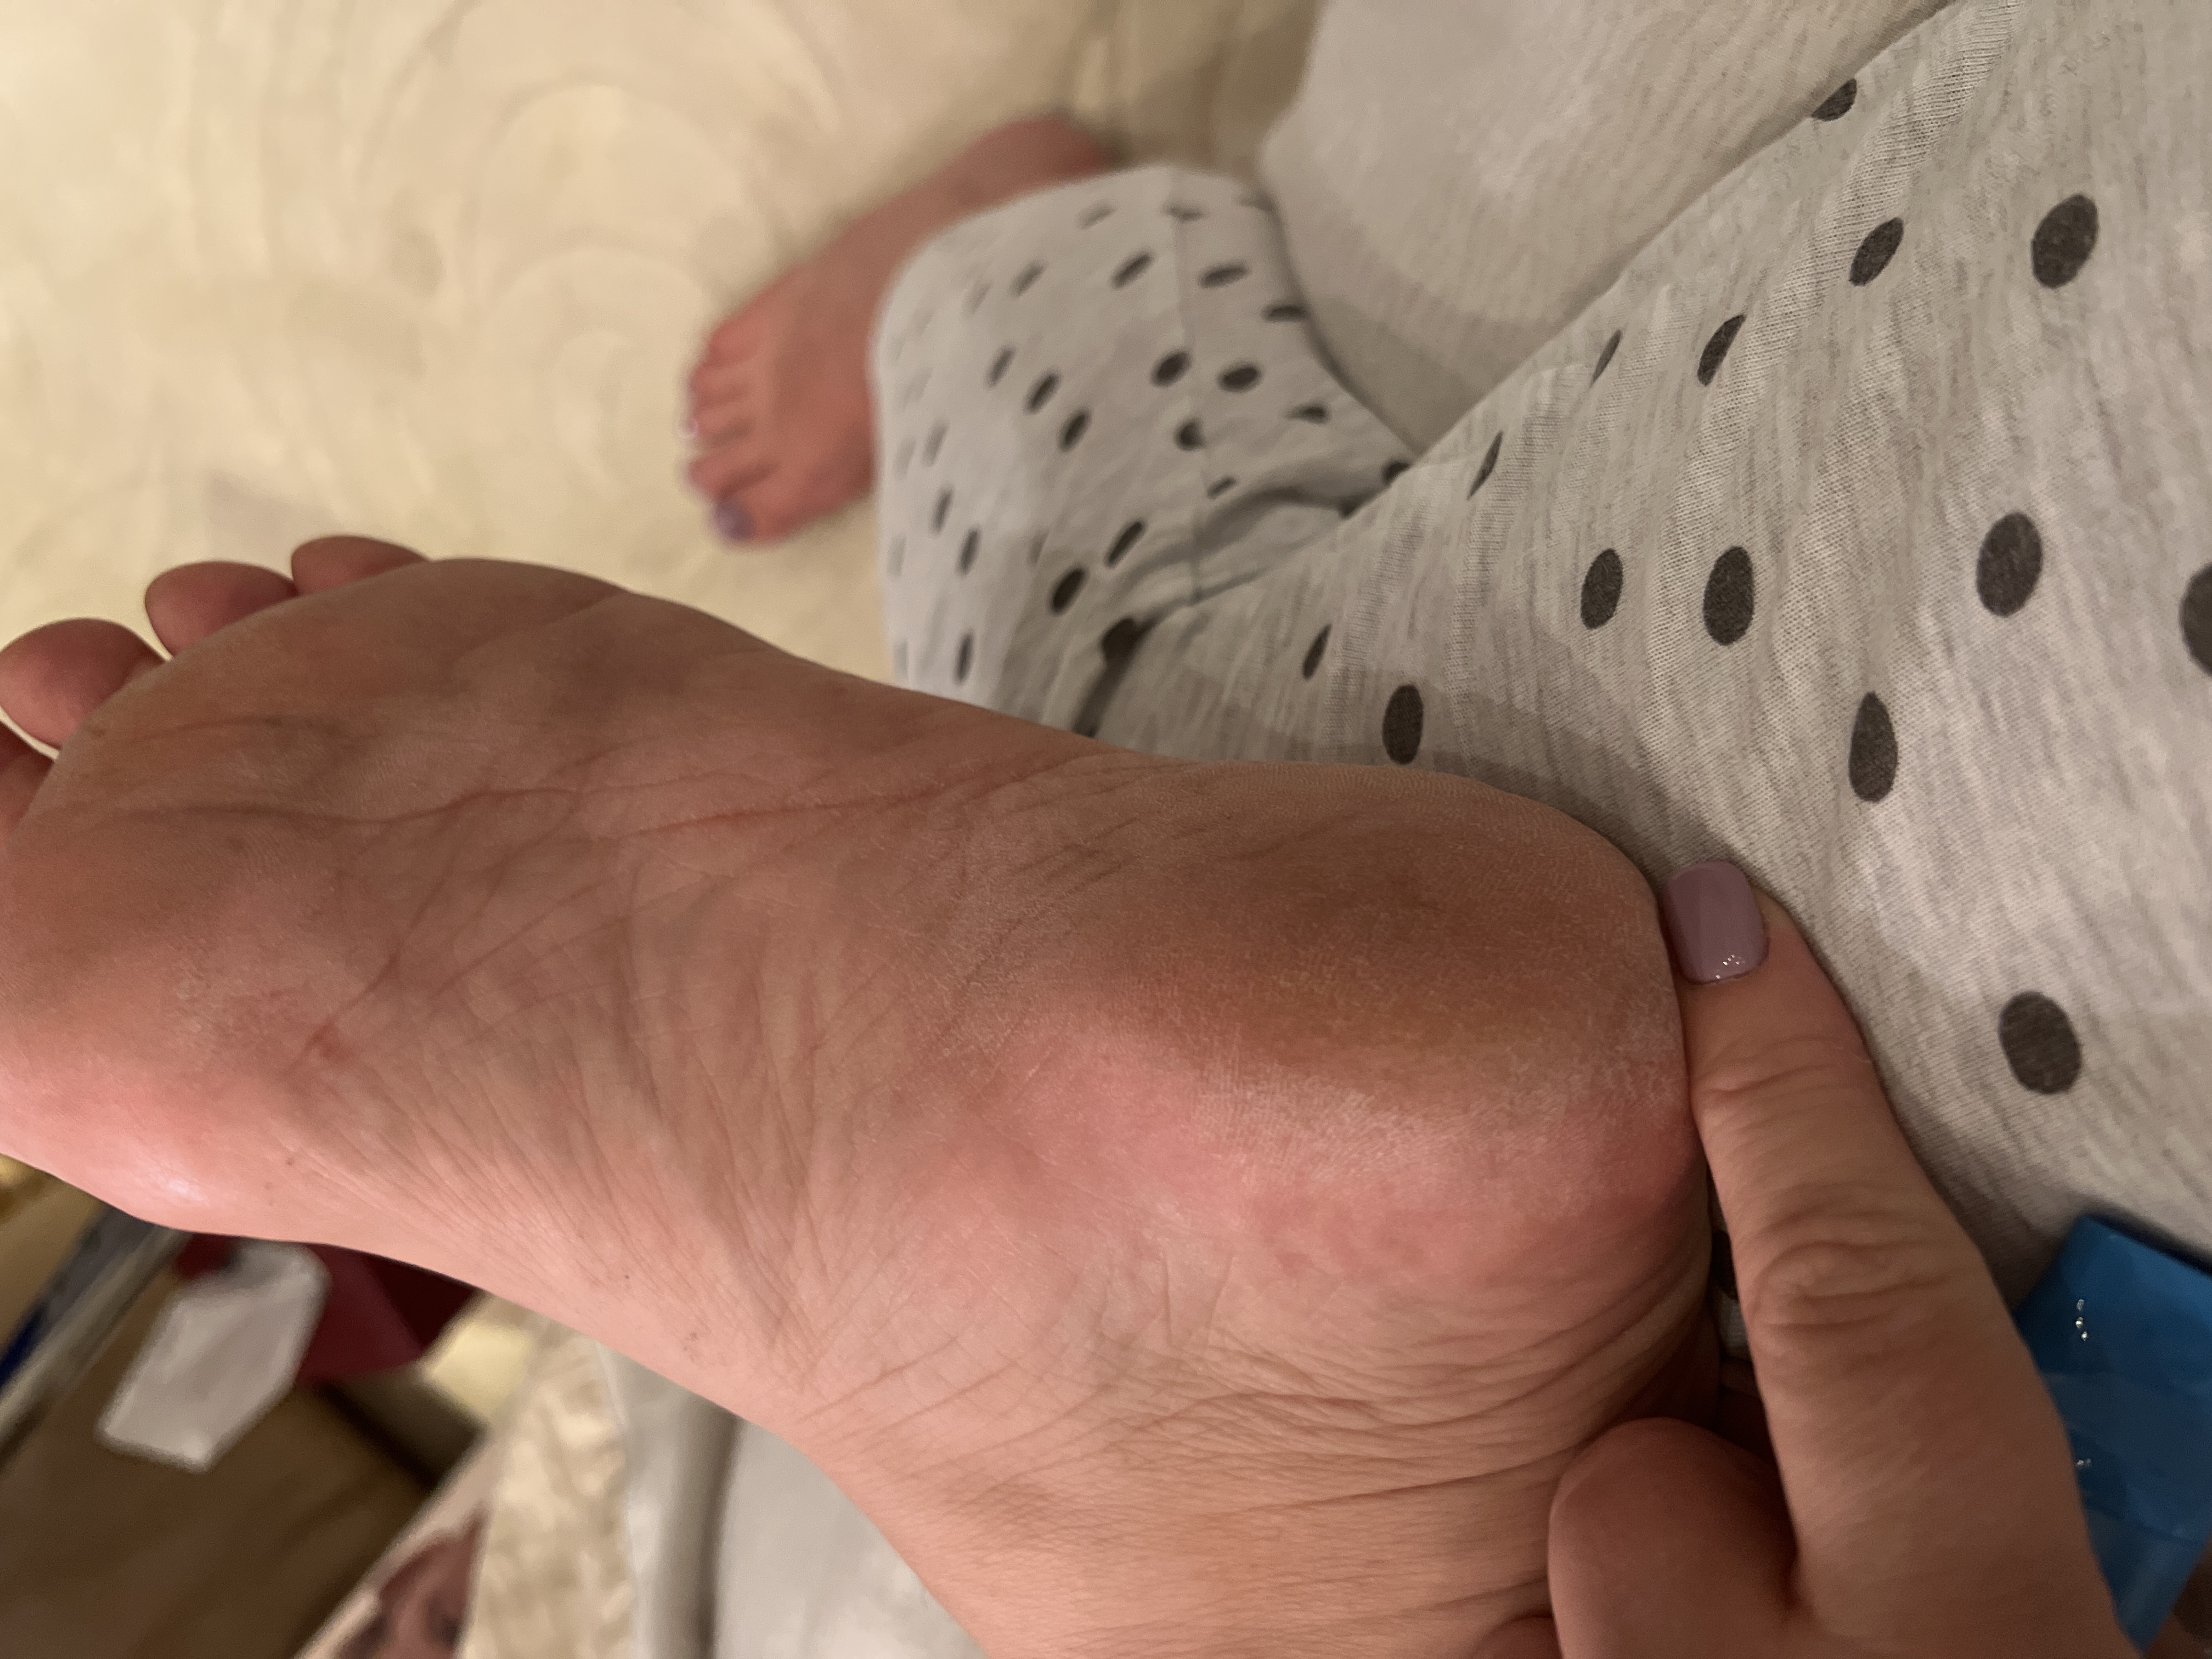 Pritech's $19 Electric Callus Remover 'Works Wonders' on Dry Feet